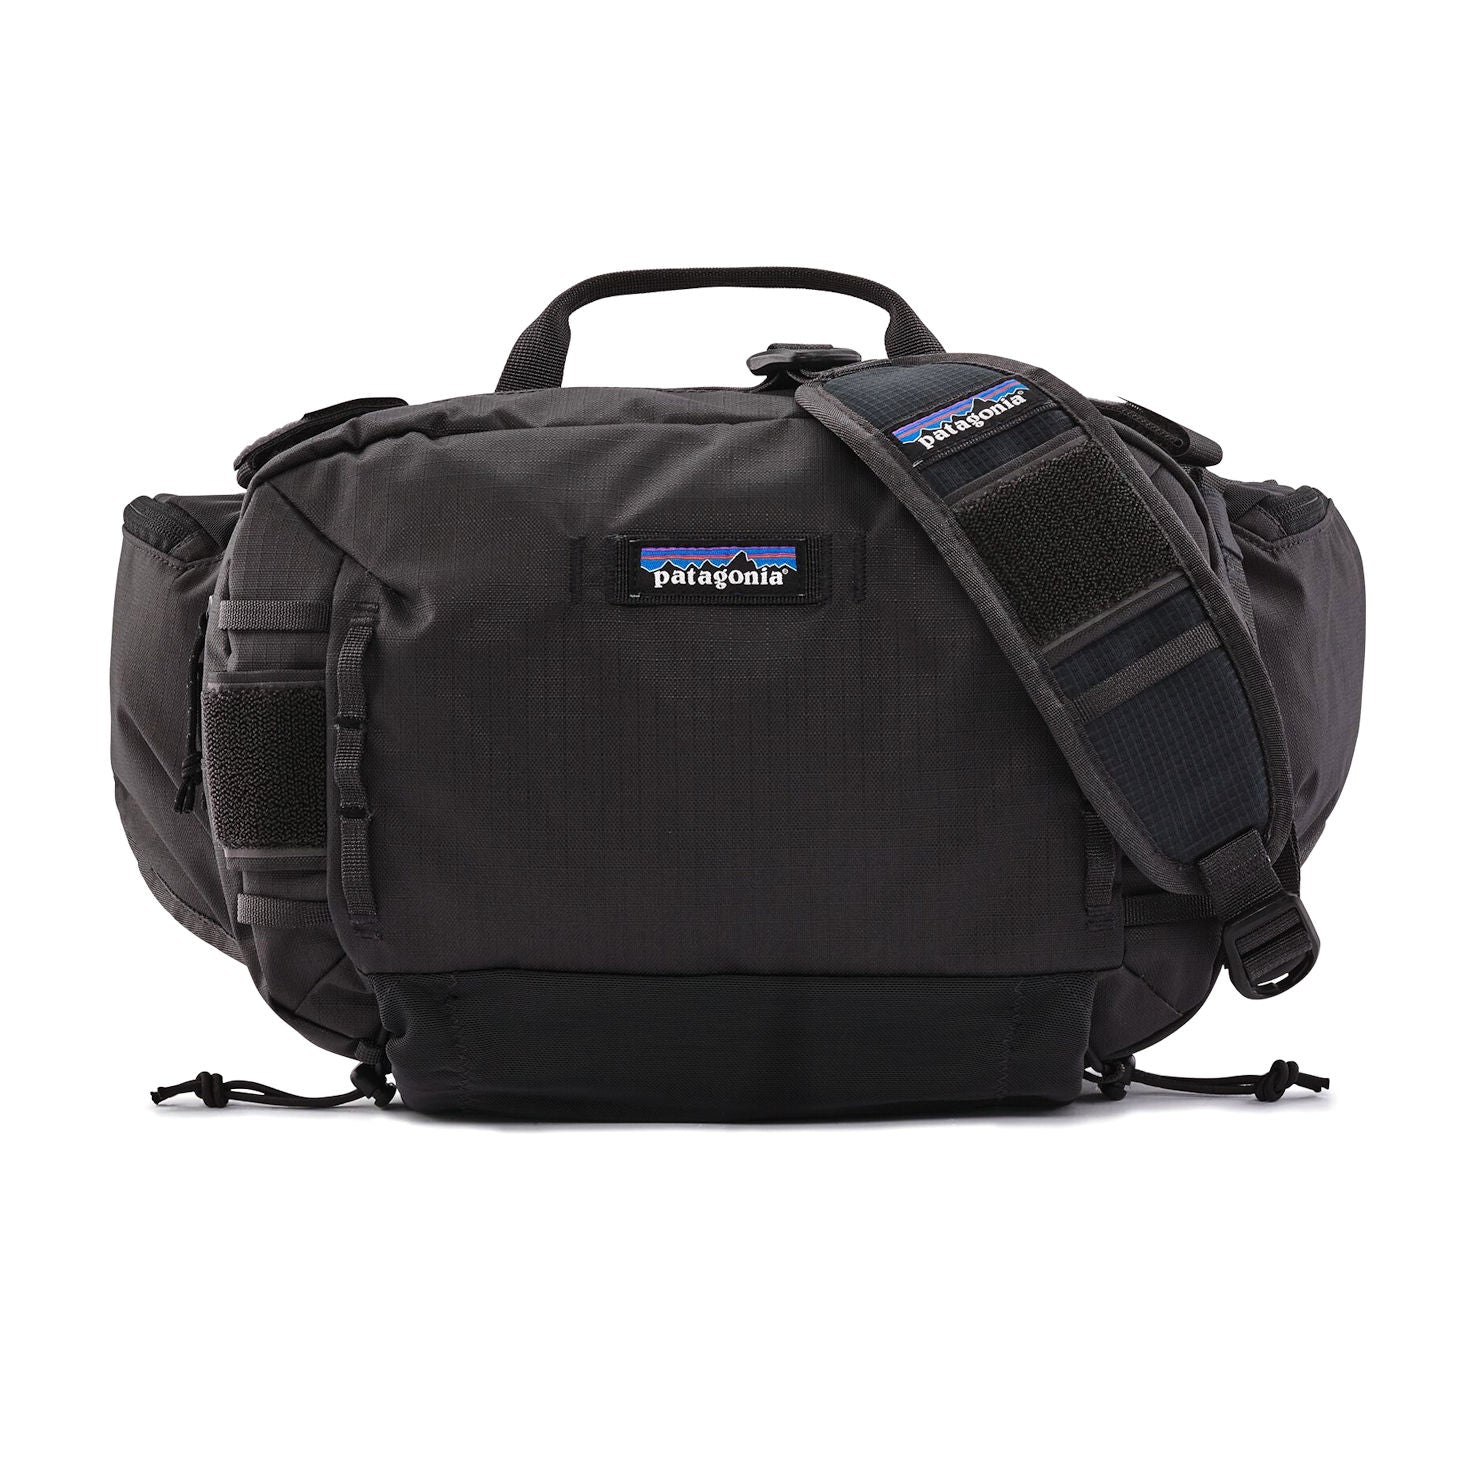 Patagonia Stealth Hip Pack 11L | Pacific Fly